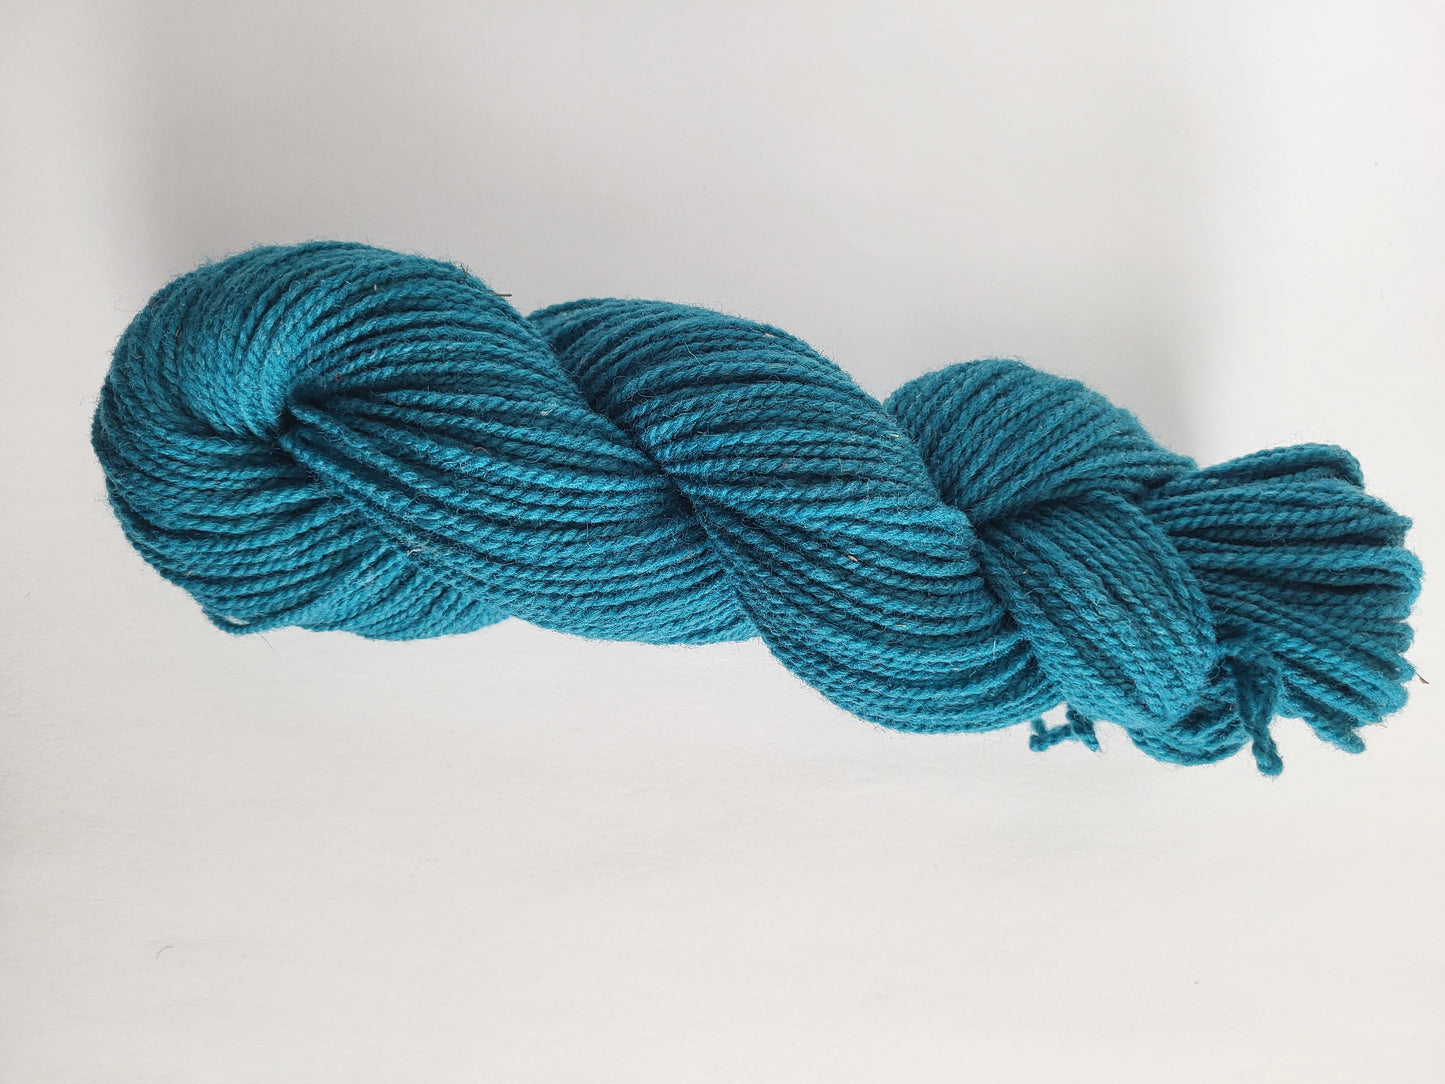 Worsted two ply - many shades available